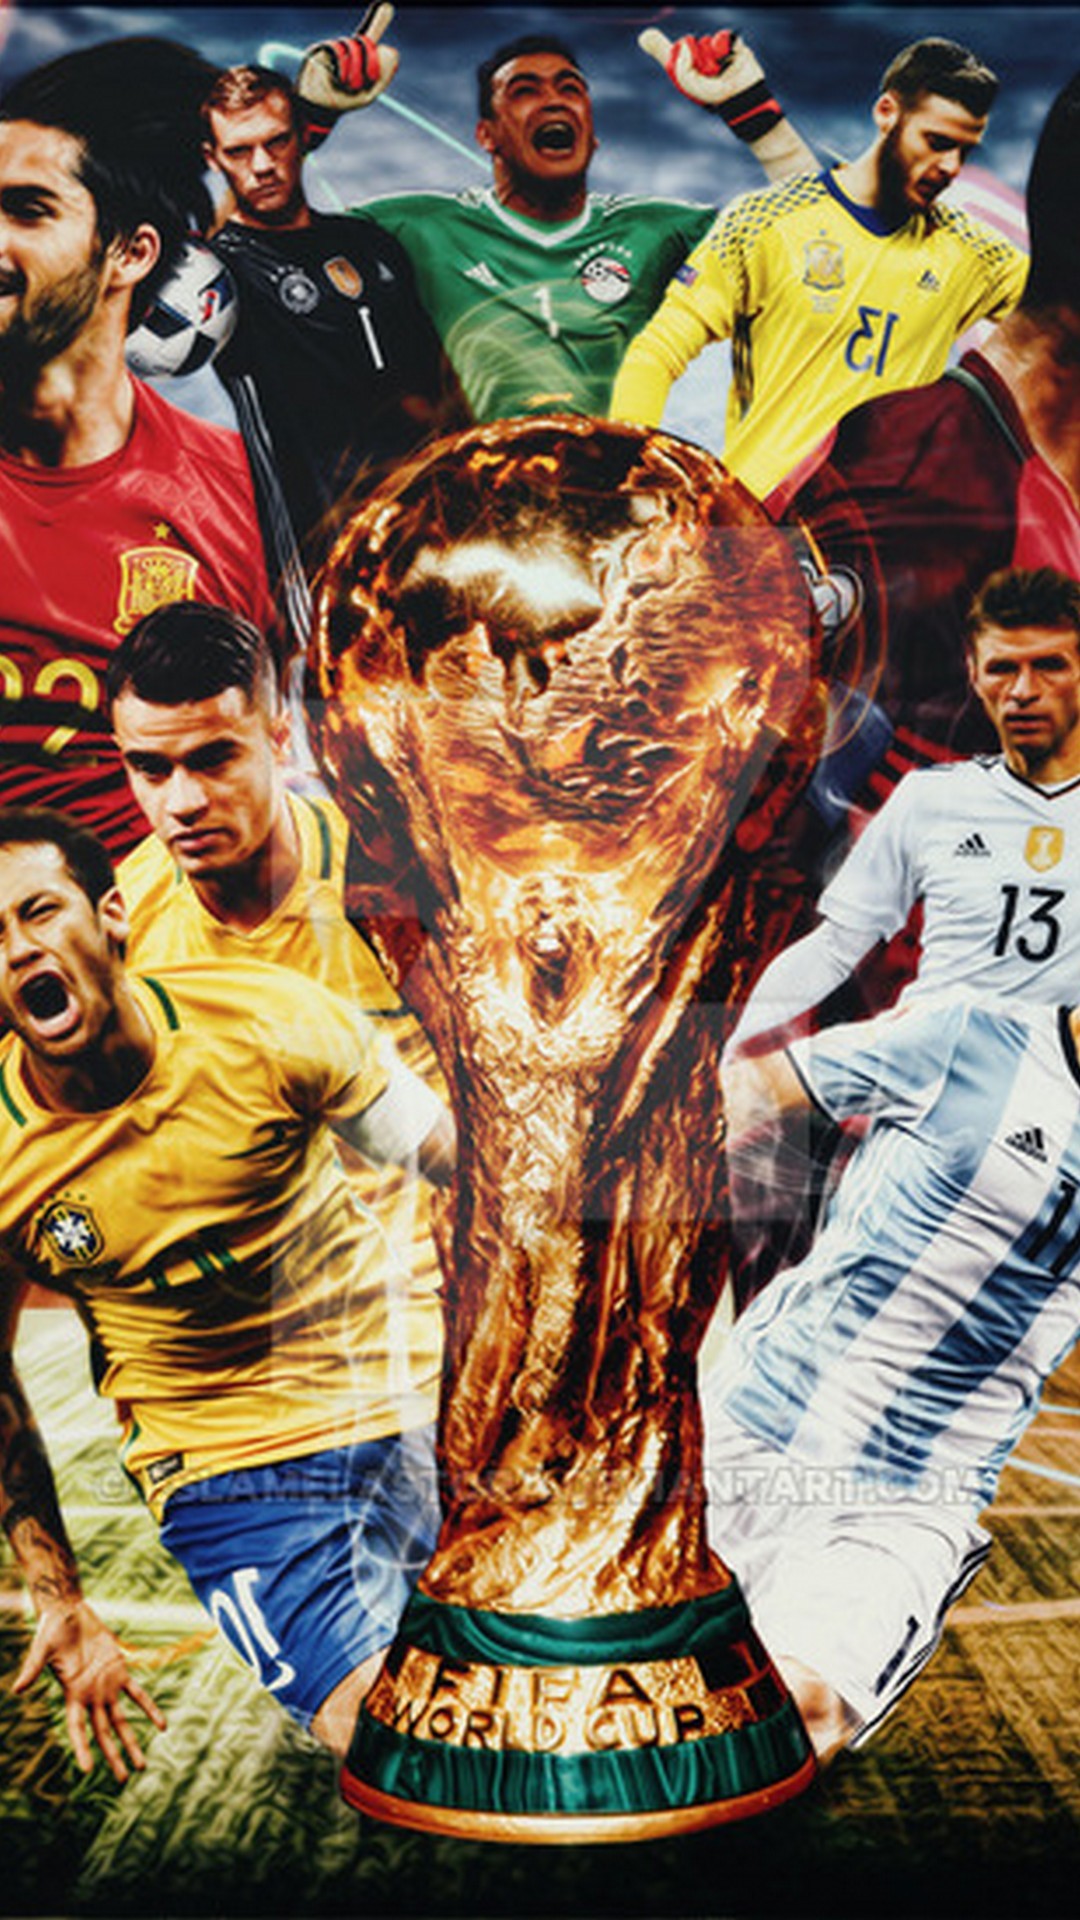 Wallpaper Fifa World Cup Android